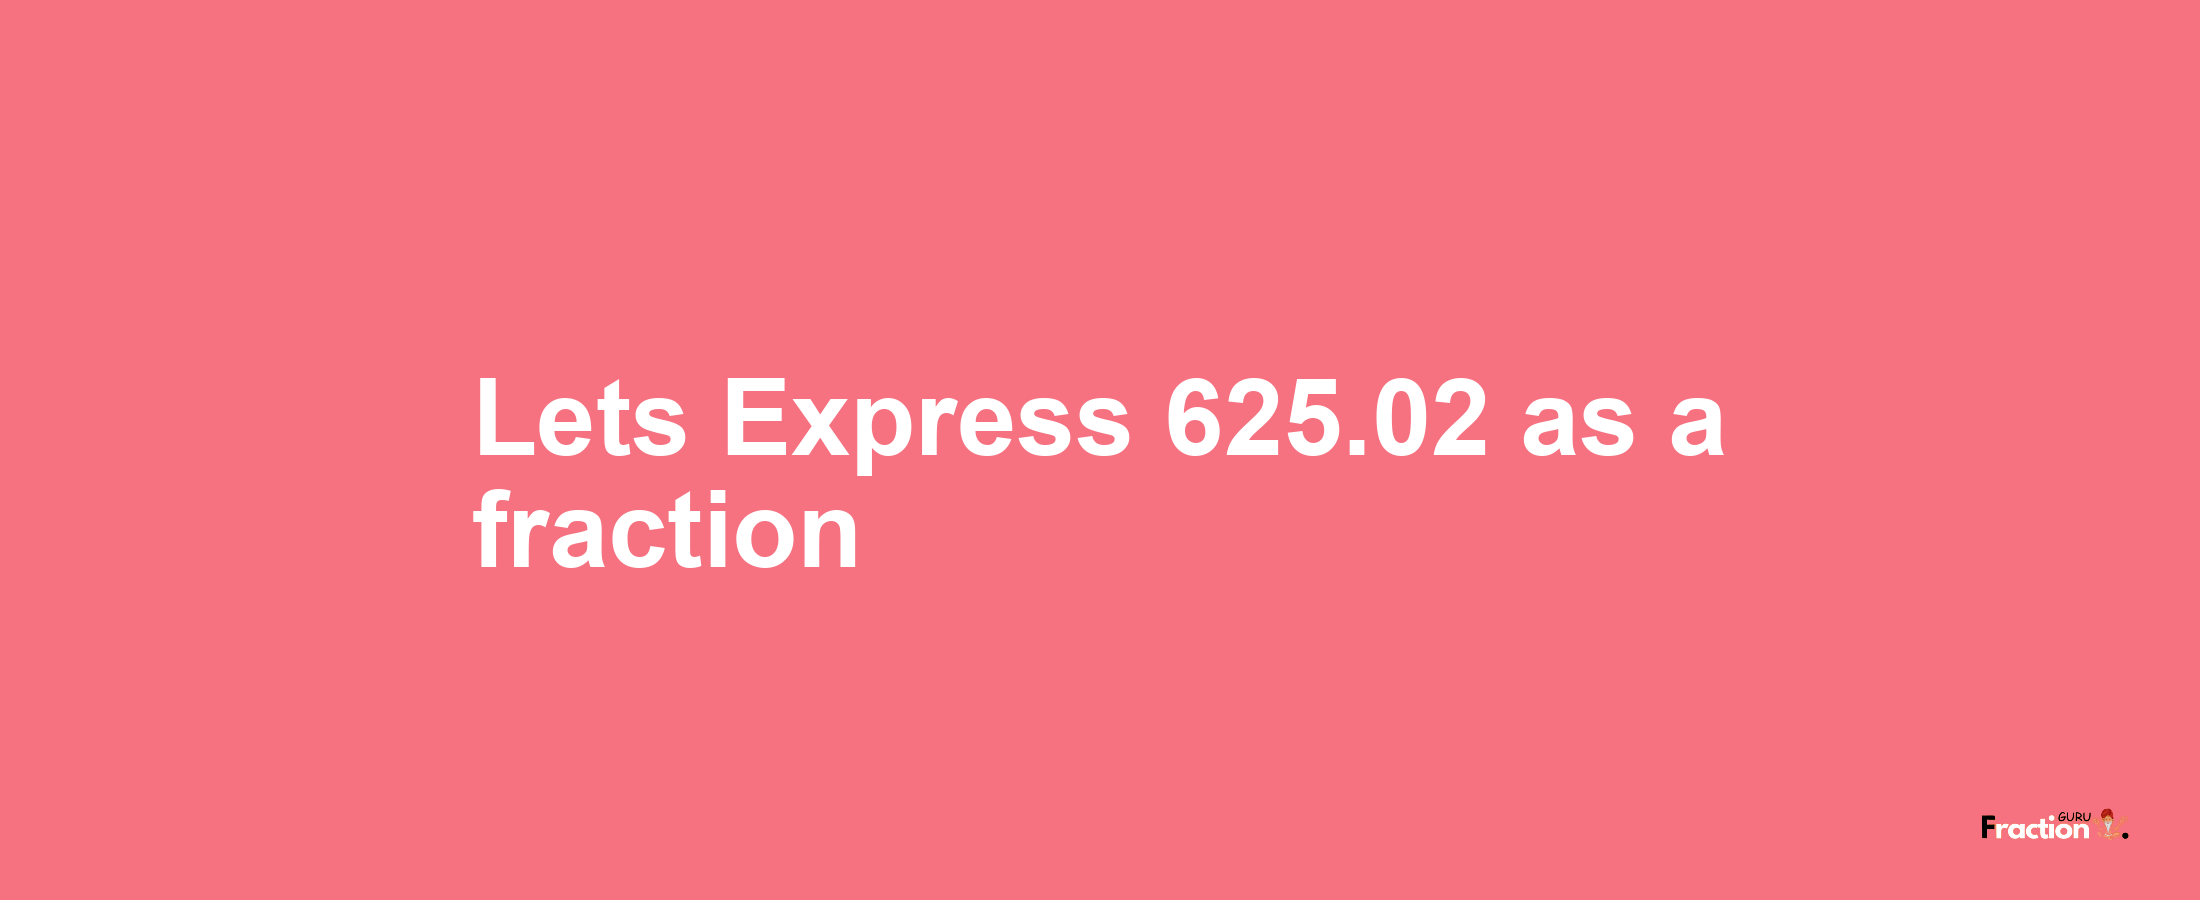 Lets Express 625.02 as afraction